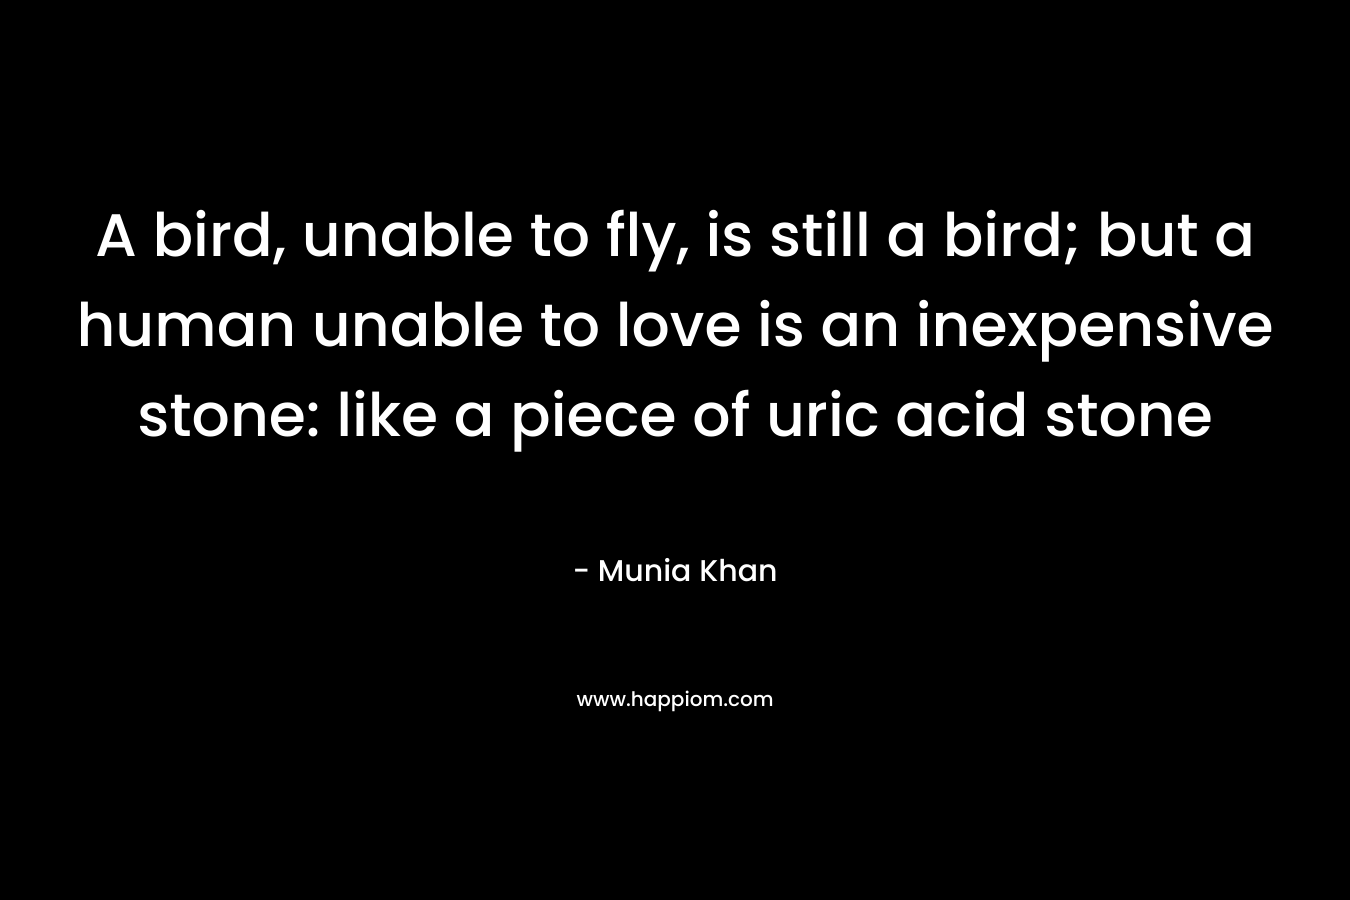 A bird, unable to fly, is still a bird; but a human unable to love is an inexpensive stone: like a piece of uric acid stone